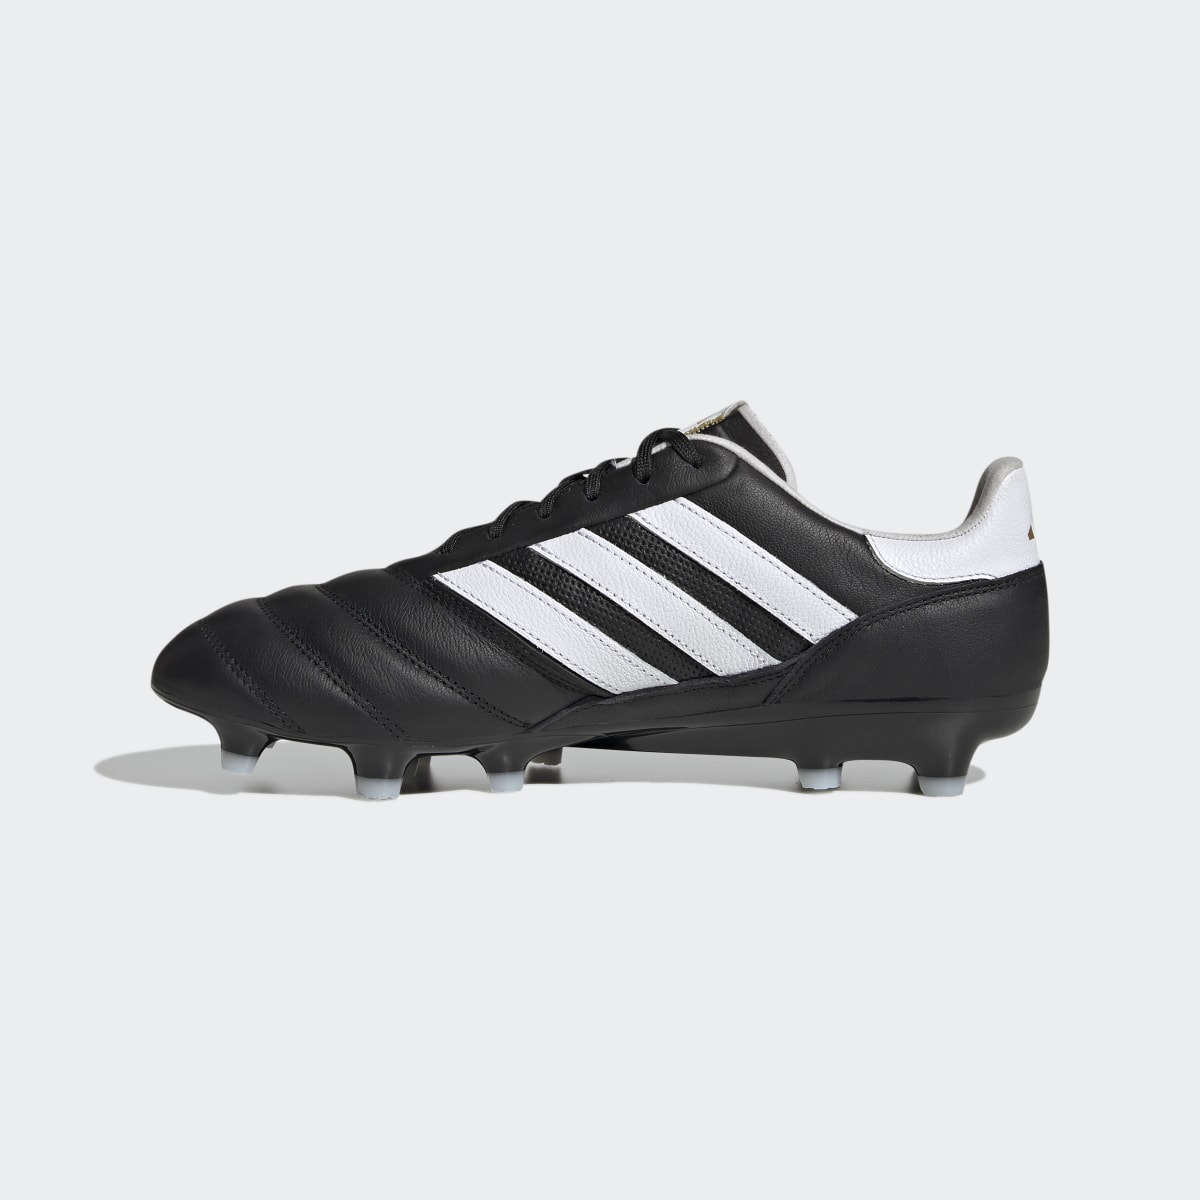 Adidas Copa Icon Firm Ground Boots. 10